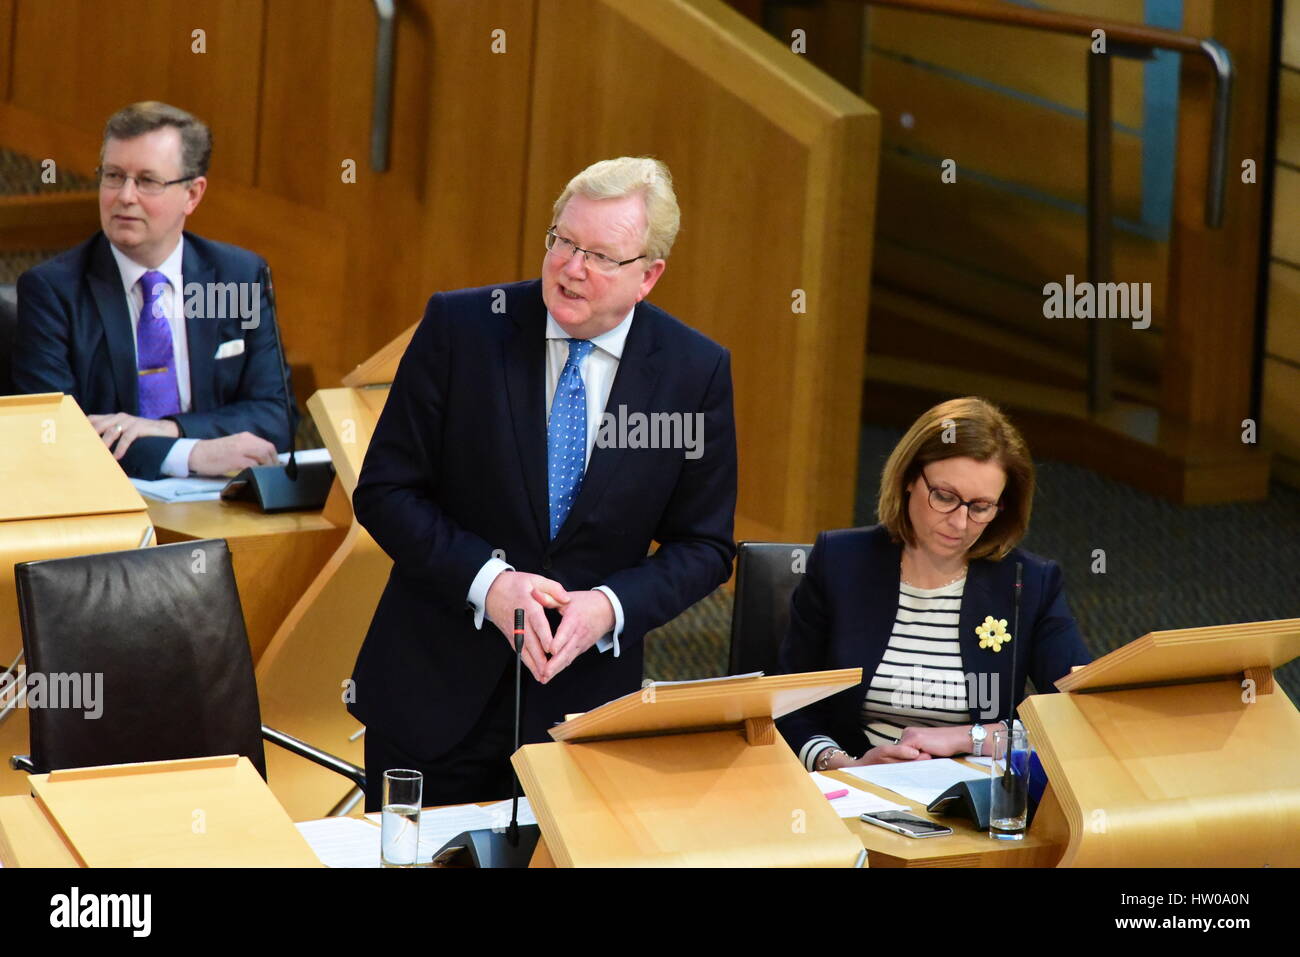 Edinburgh, Scotland, United Kingdom. 15th March, 2017. Jackson Carlaw, Scottish Conservative Party deputy leader and spokesperson on external affairs speaking during the debate in the Scottish Parliament on the implications of the European Union referendum on Scotland, Credit: Ken Jack/Alamy Live News Stock Photo